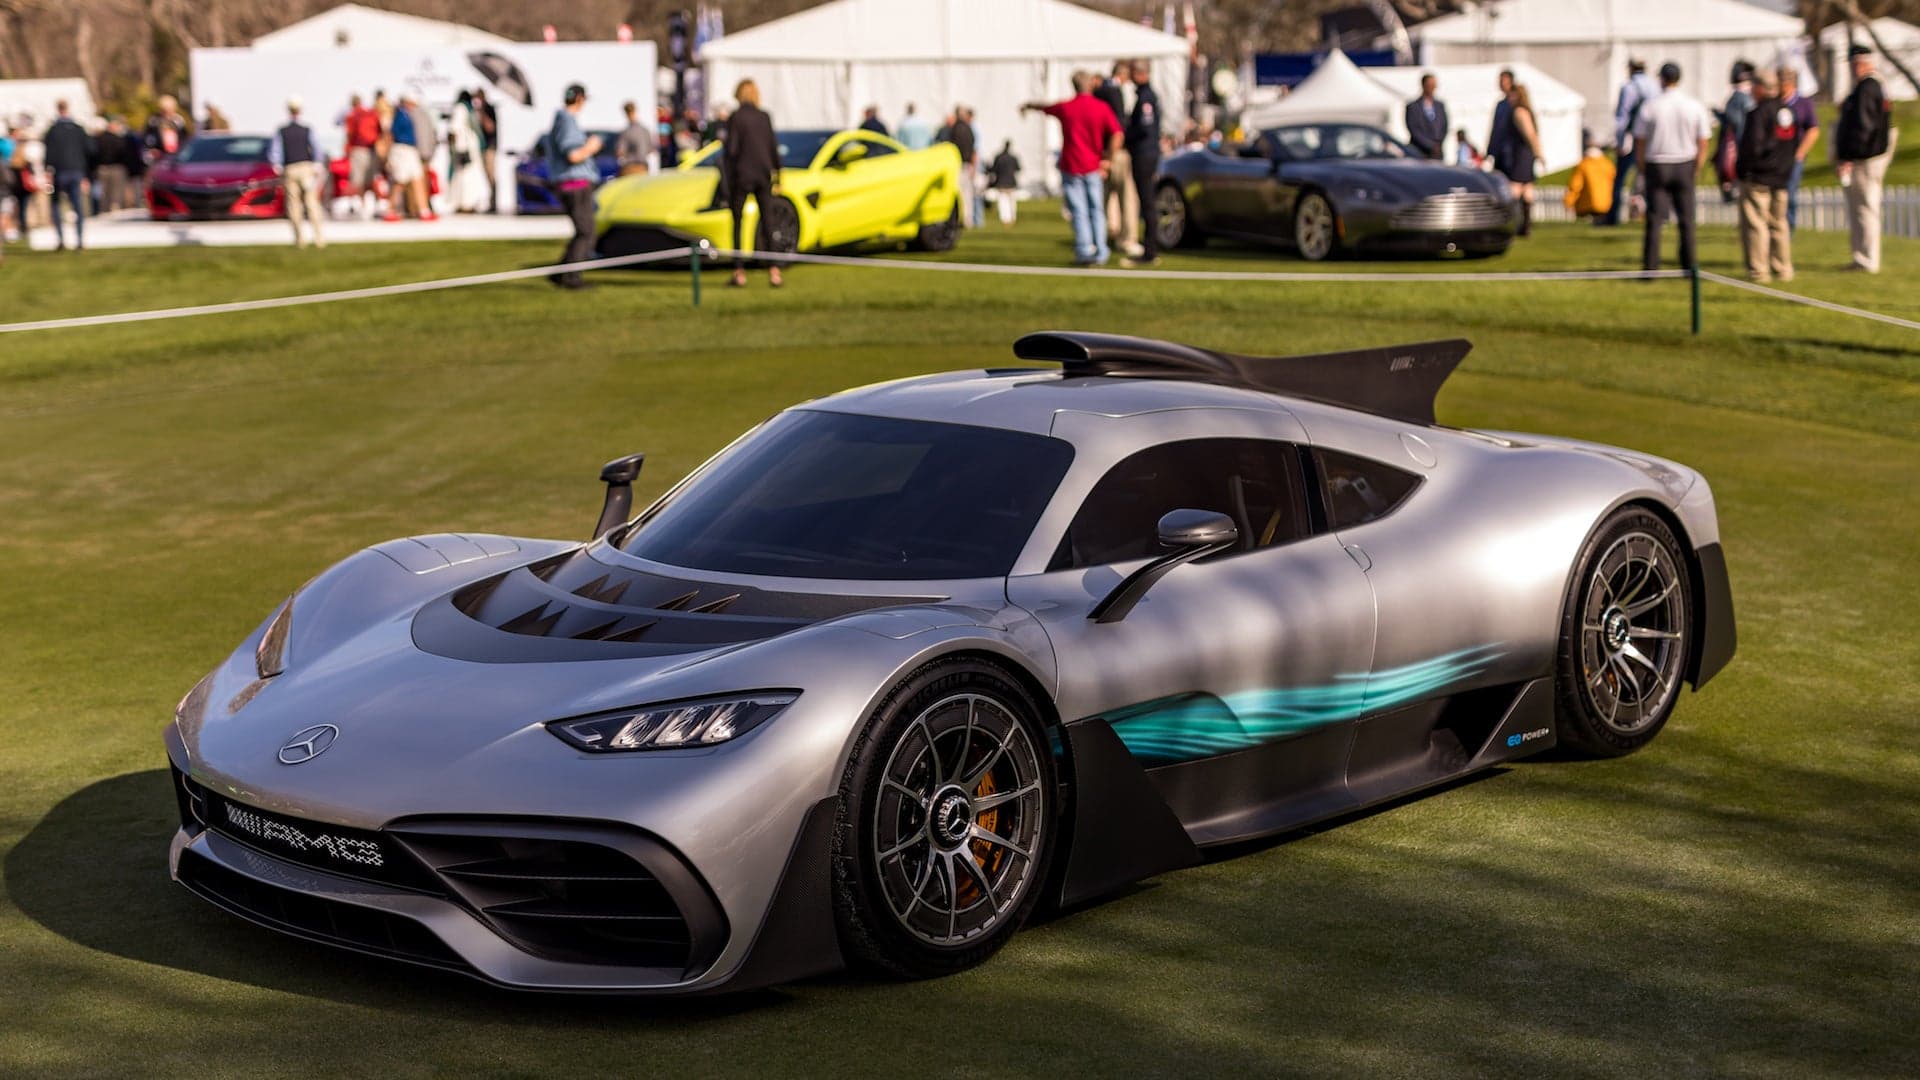 The Hottest Cars From the 2018 Amelia Island Concours D’Elegance